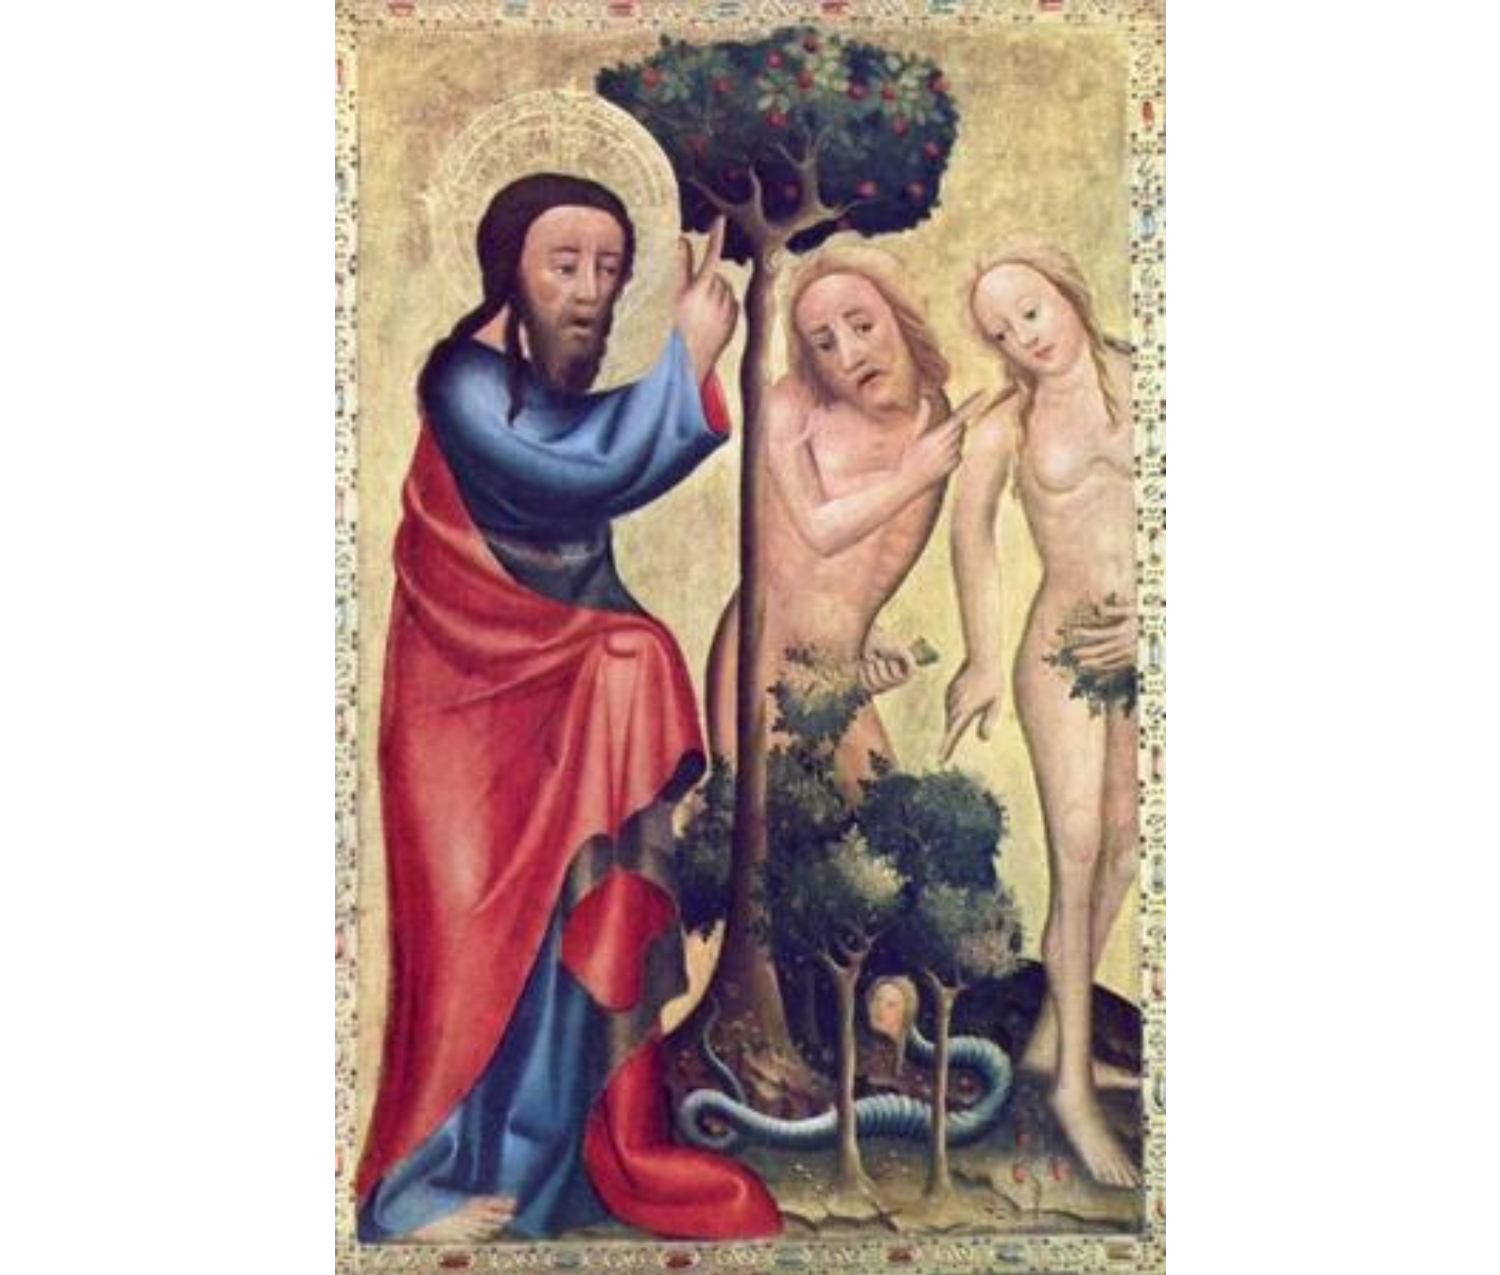 A tall tree with red fruit grow between a man dressed in blue and red robes with a halo and a blond, nude man and woman covering their crotches with leaves. At their feet is a snake with the head of the woman.